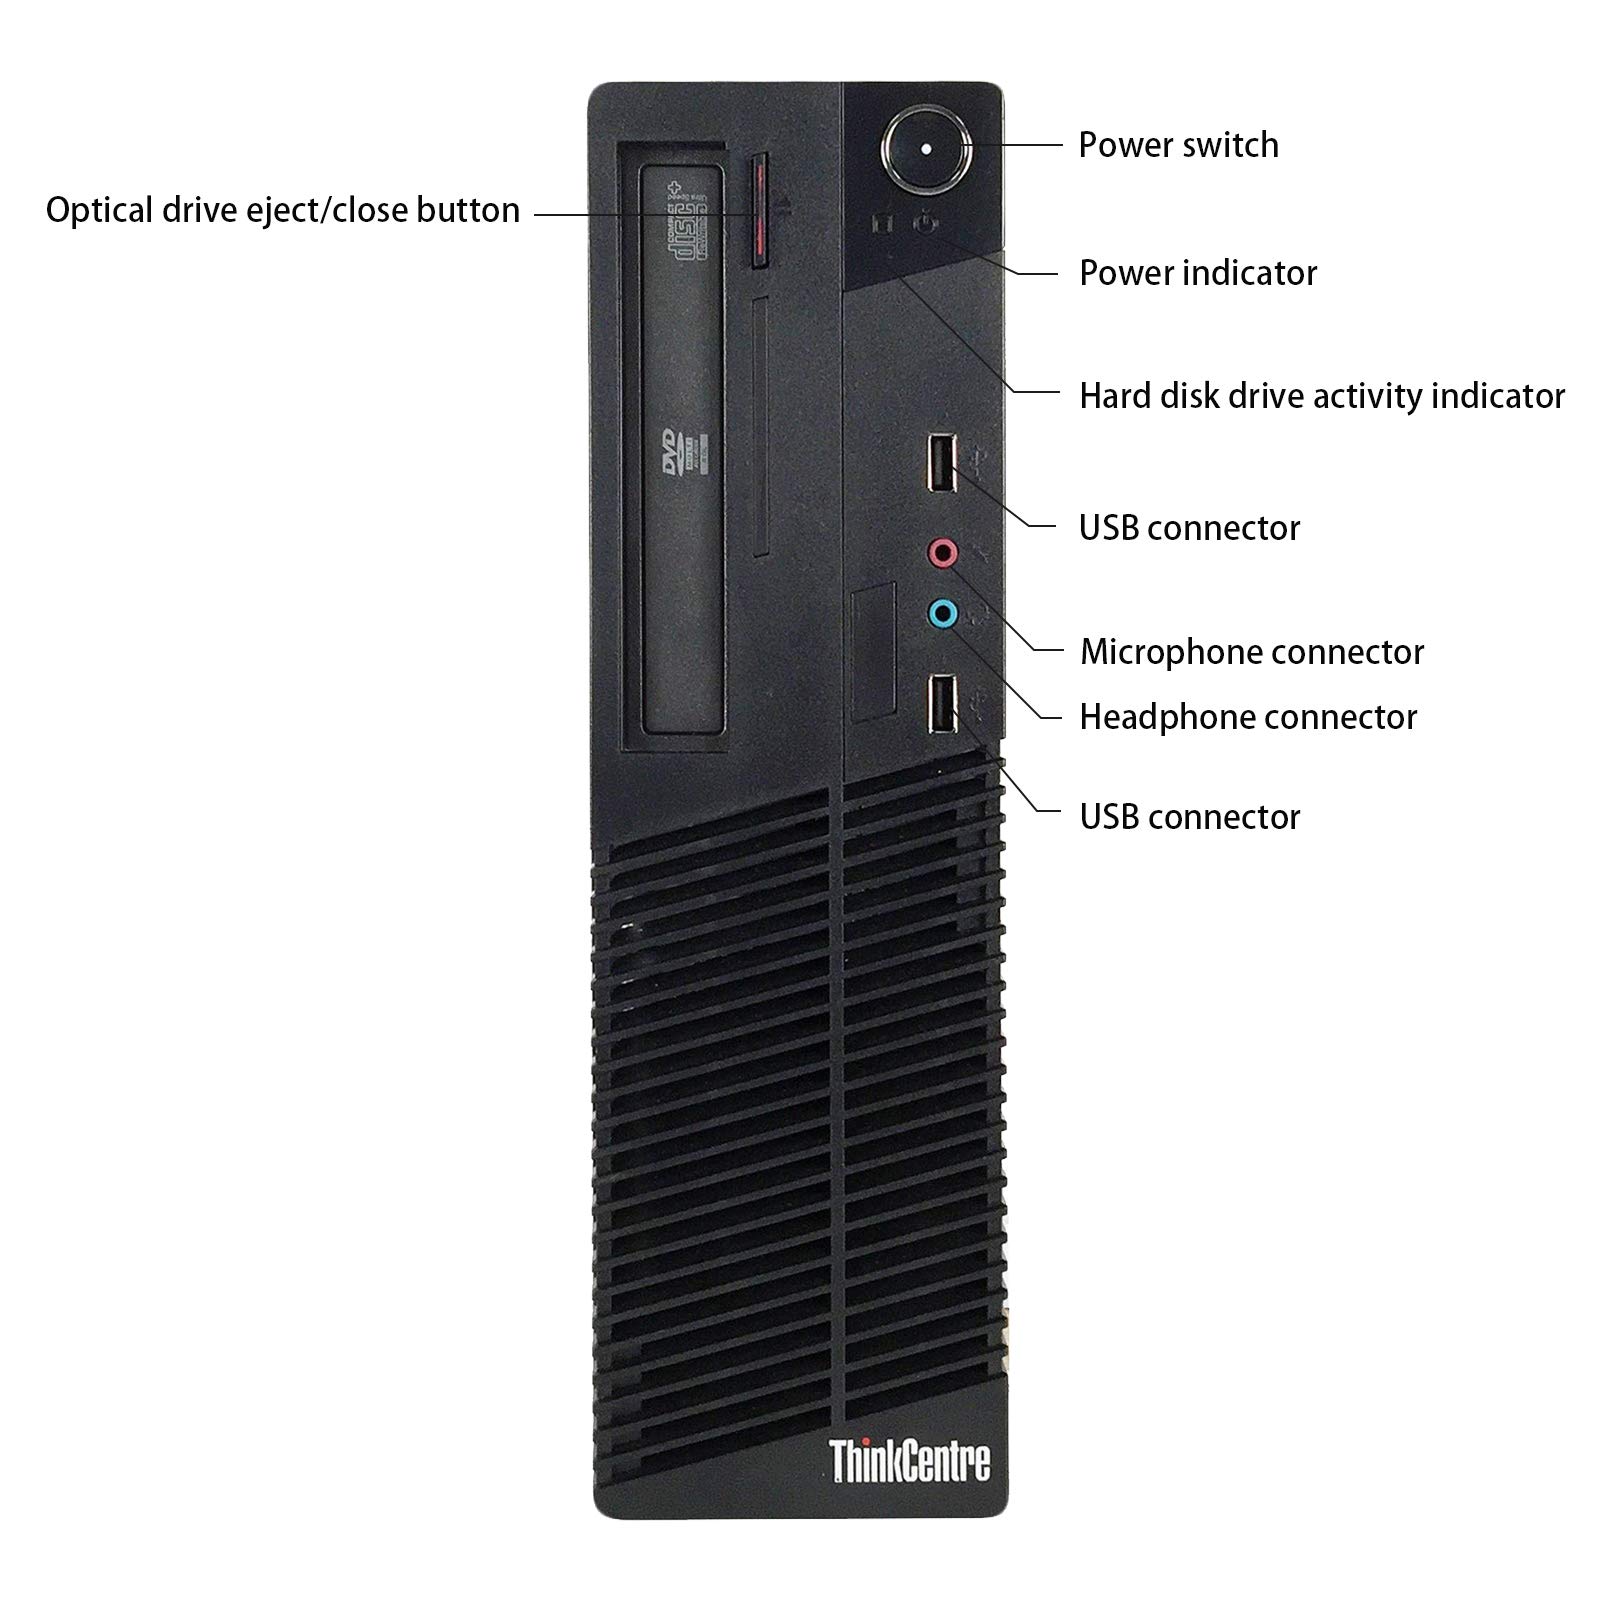 Lenovo ThinkCentre Small Form Desktop PC Computer Package, Intel Quad Core i5 up to 3.4GHz, 8G DDR3, 1T, DVD, VGA, DP, 19 Inch LCD Monitor, Keyboard, Mouse, Win 10 Pro 64 (Renewed)